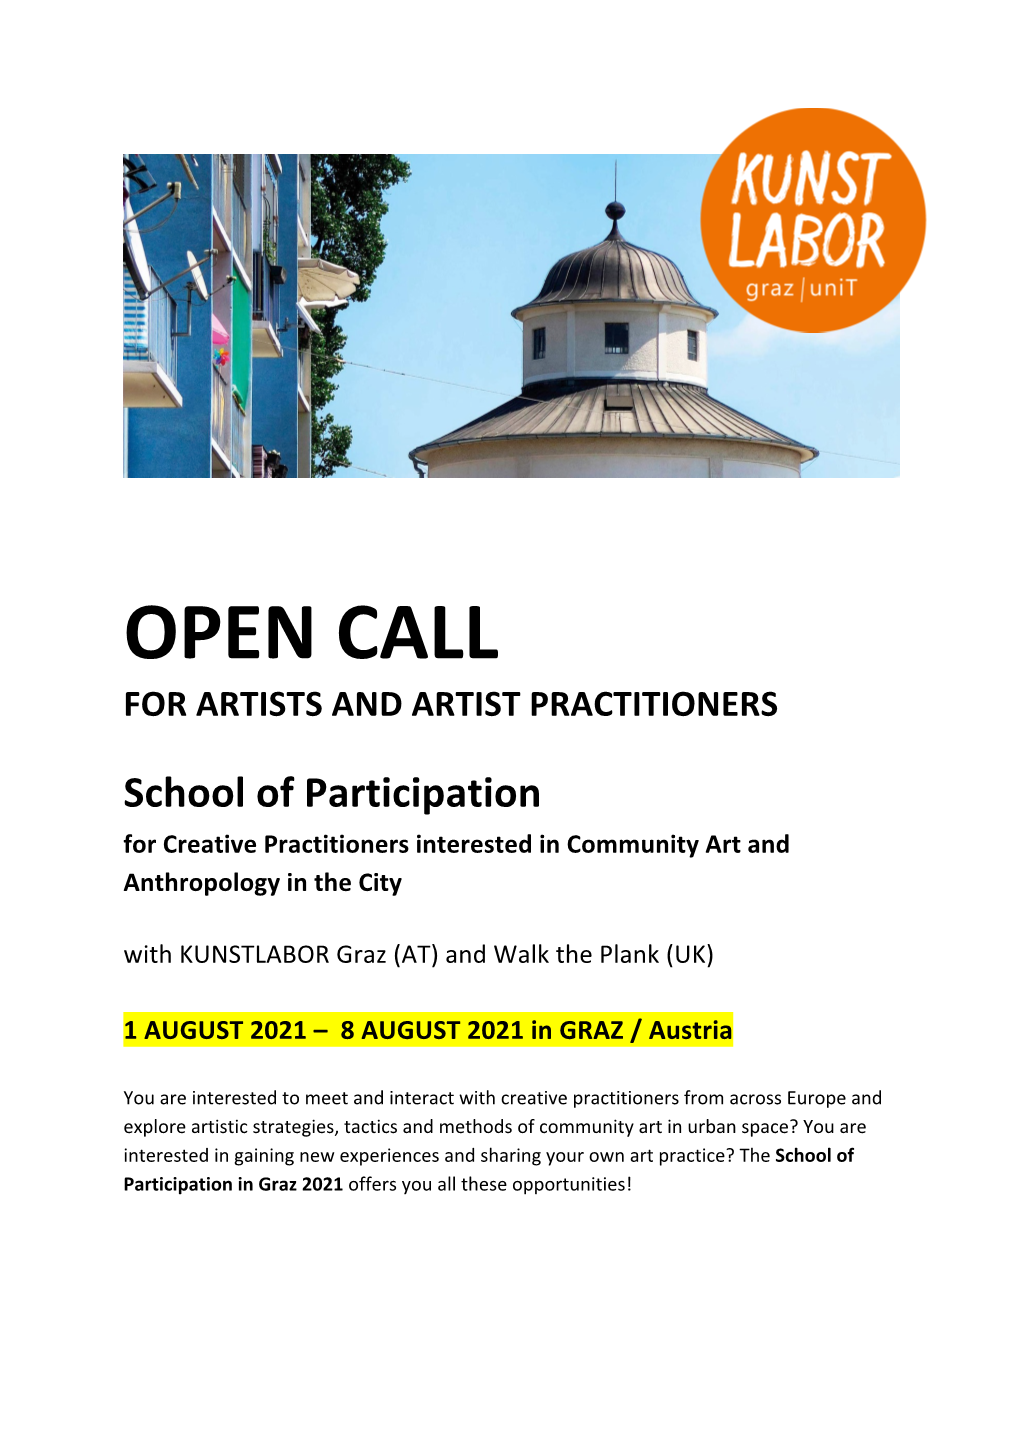 Open Call for Artists and Artist Practitioners